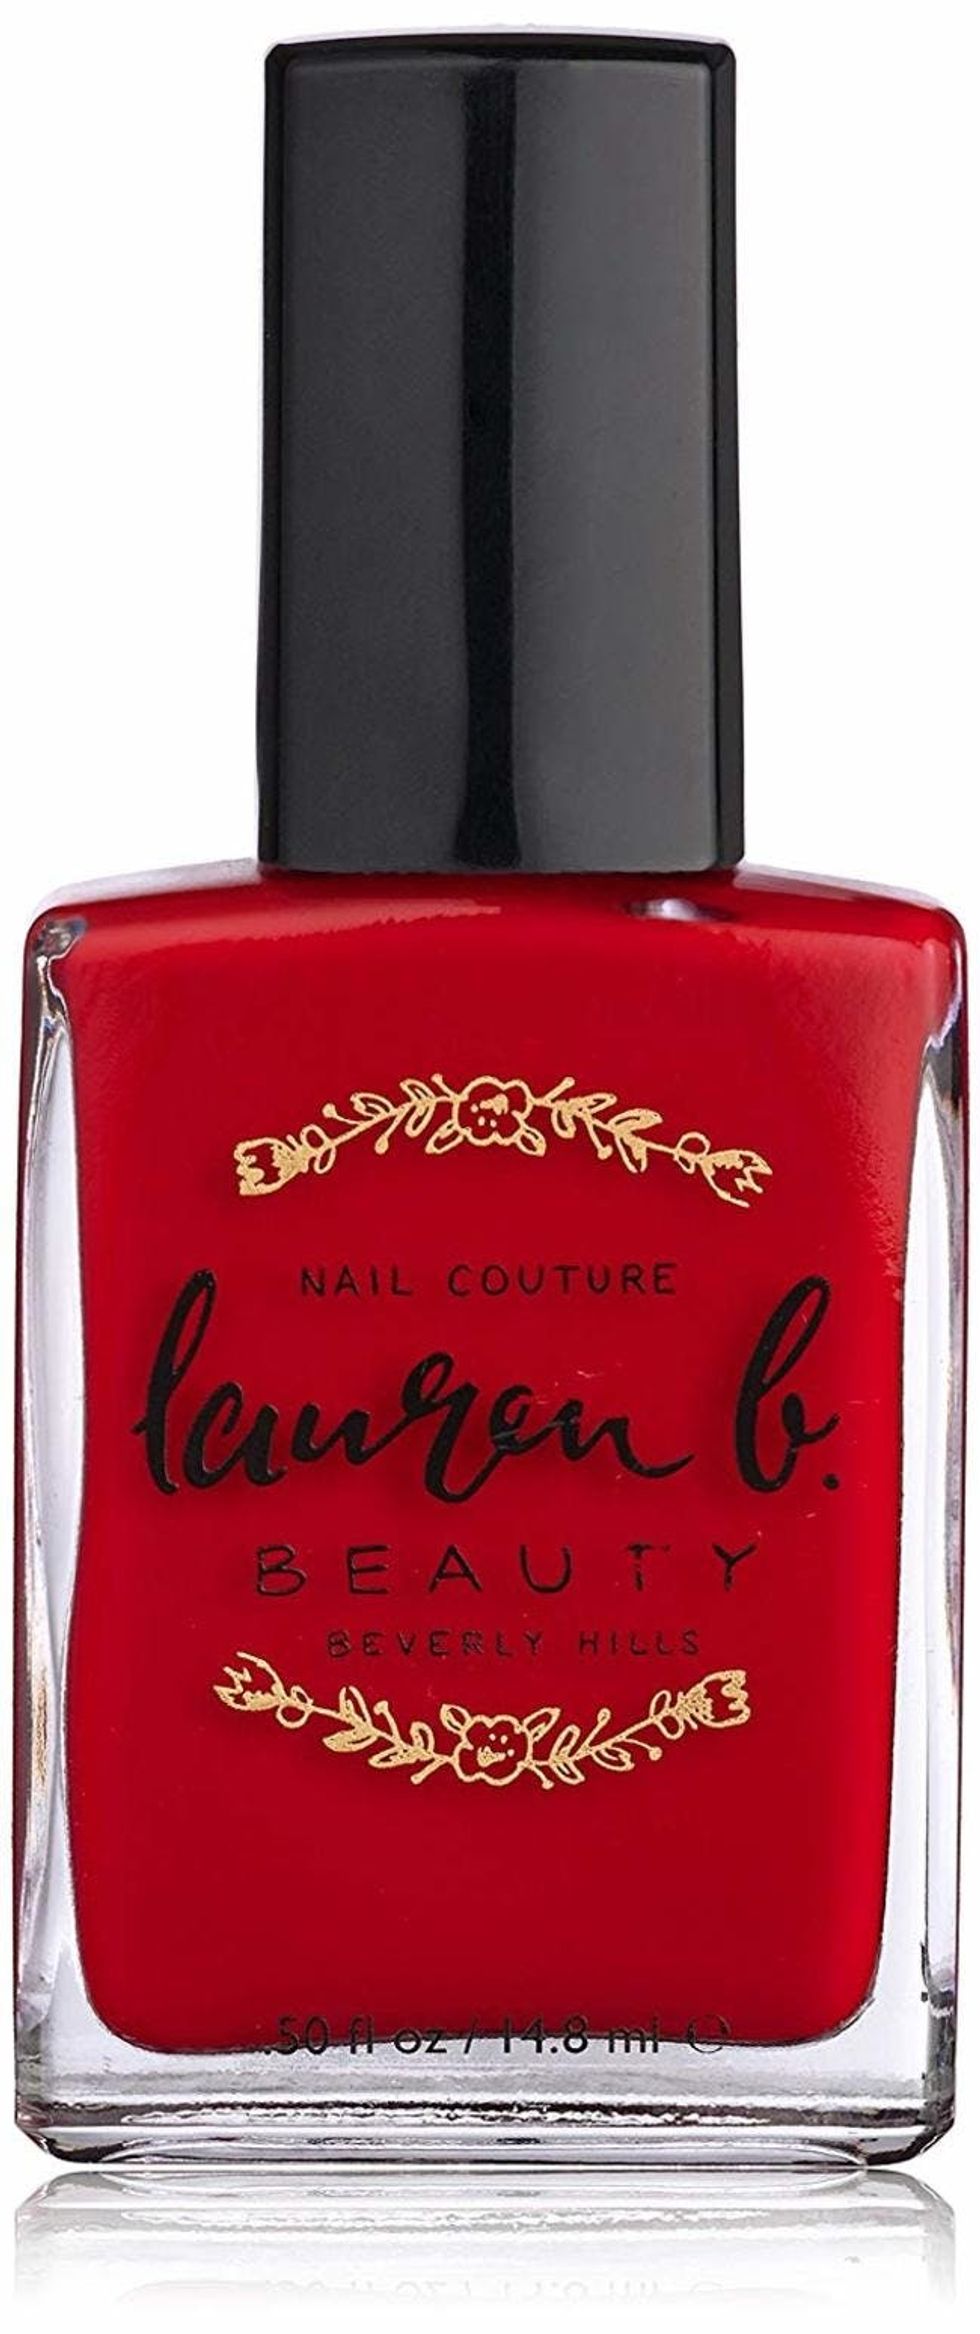 11 Red Nail Polishes That Complement Every Skin Tone - Brit + Co